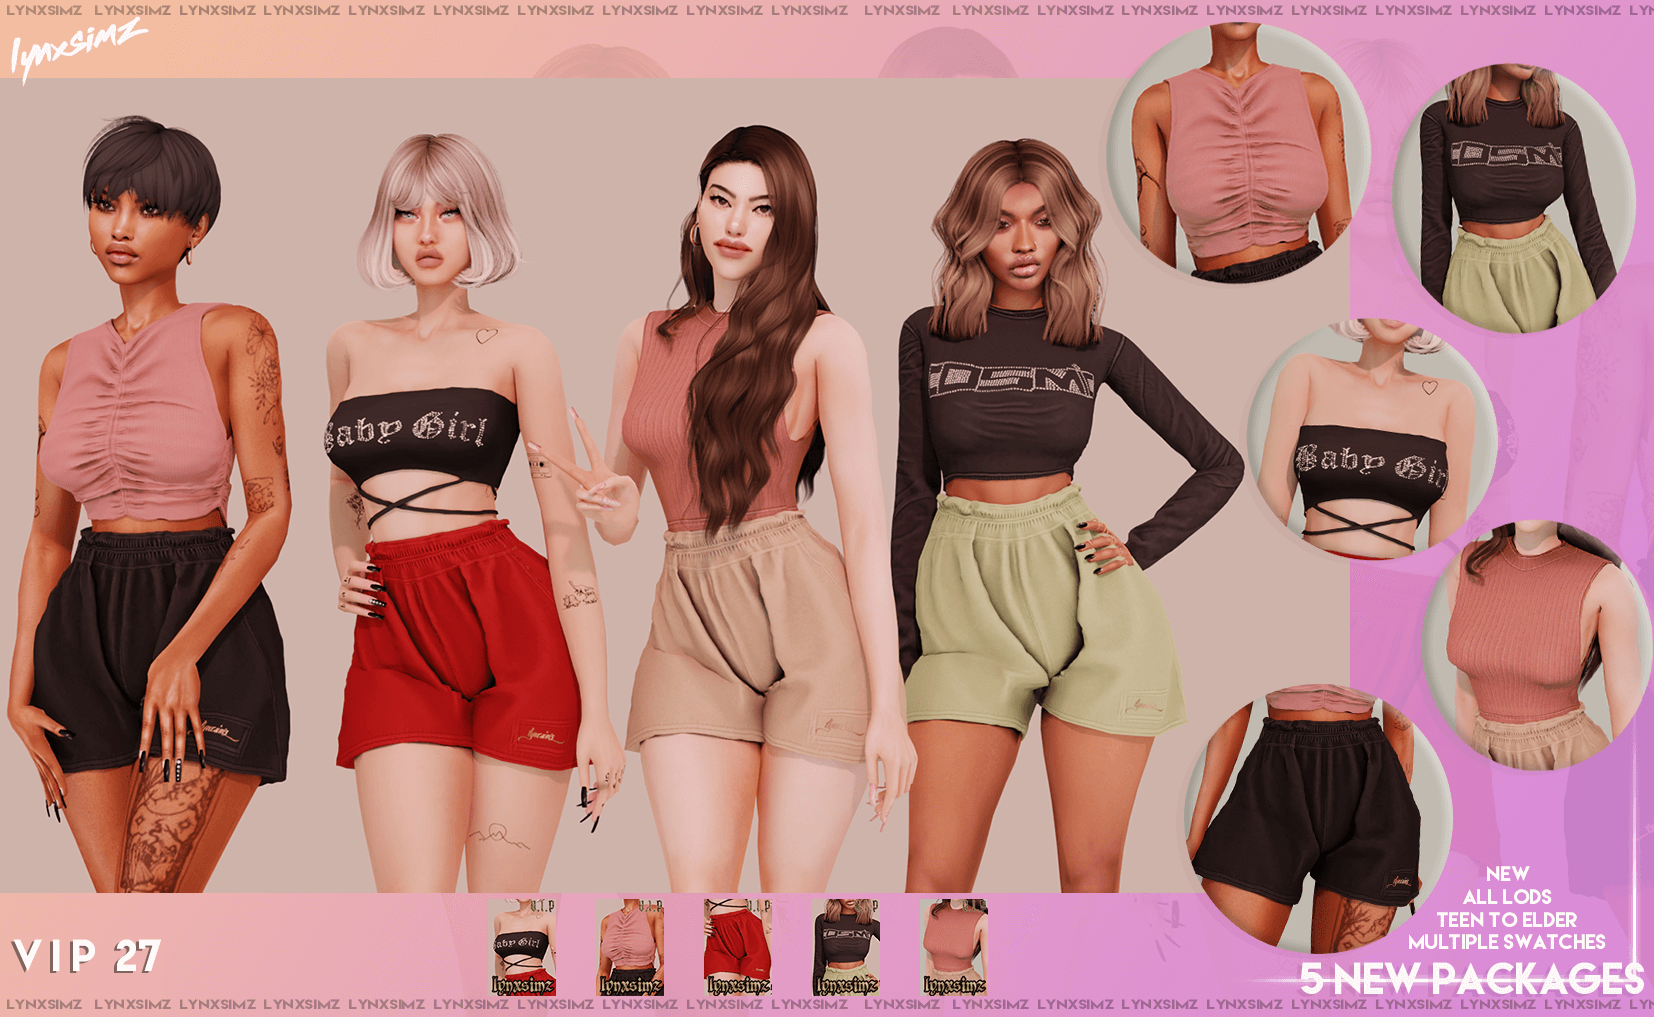 Pack Clothing By Lynxsimz Patreon Nsfw Packs Collections Accessories Clothing The